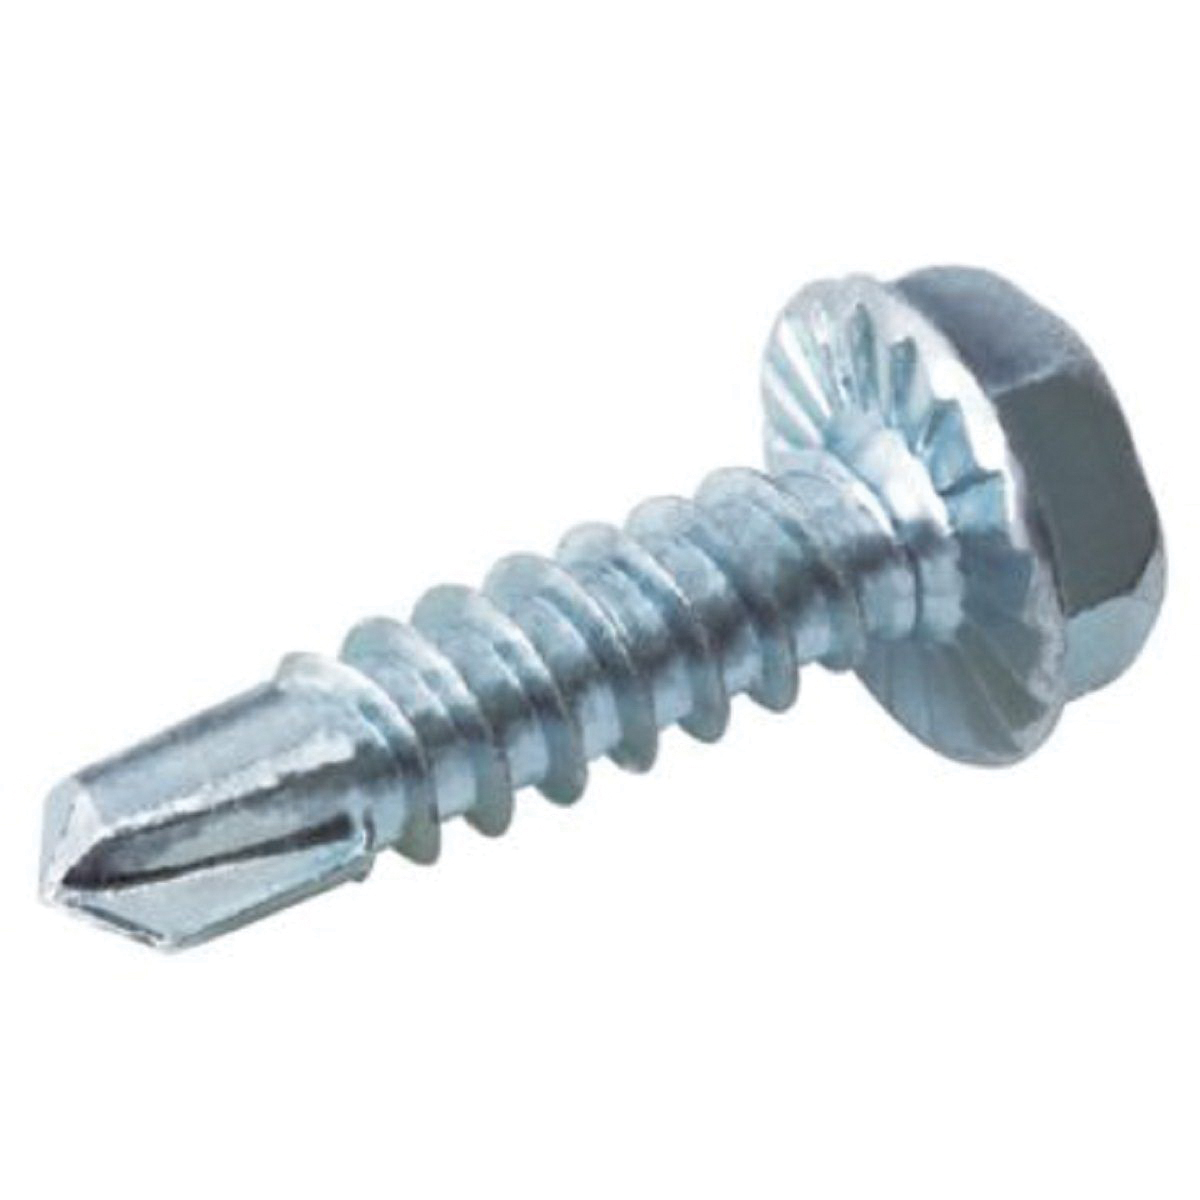 Duro Dyne® Pro Point 14177 Self Piercing Screw, #8 Thread, 1/2 in OAL, Hexagonal Head, 1/4 in Drive, Unslotted Drive